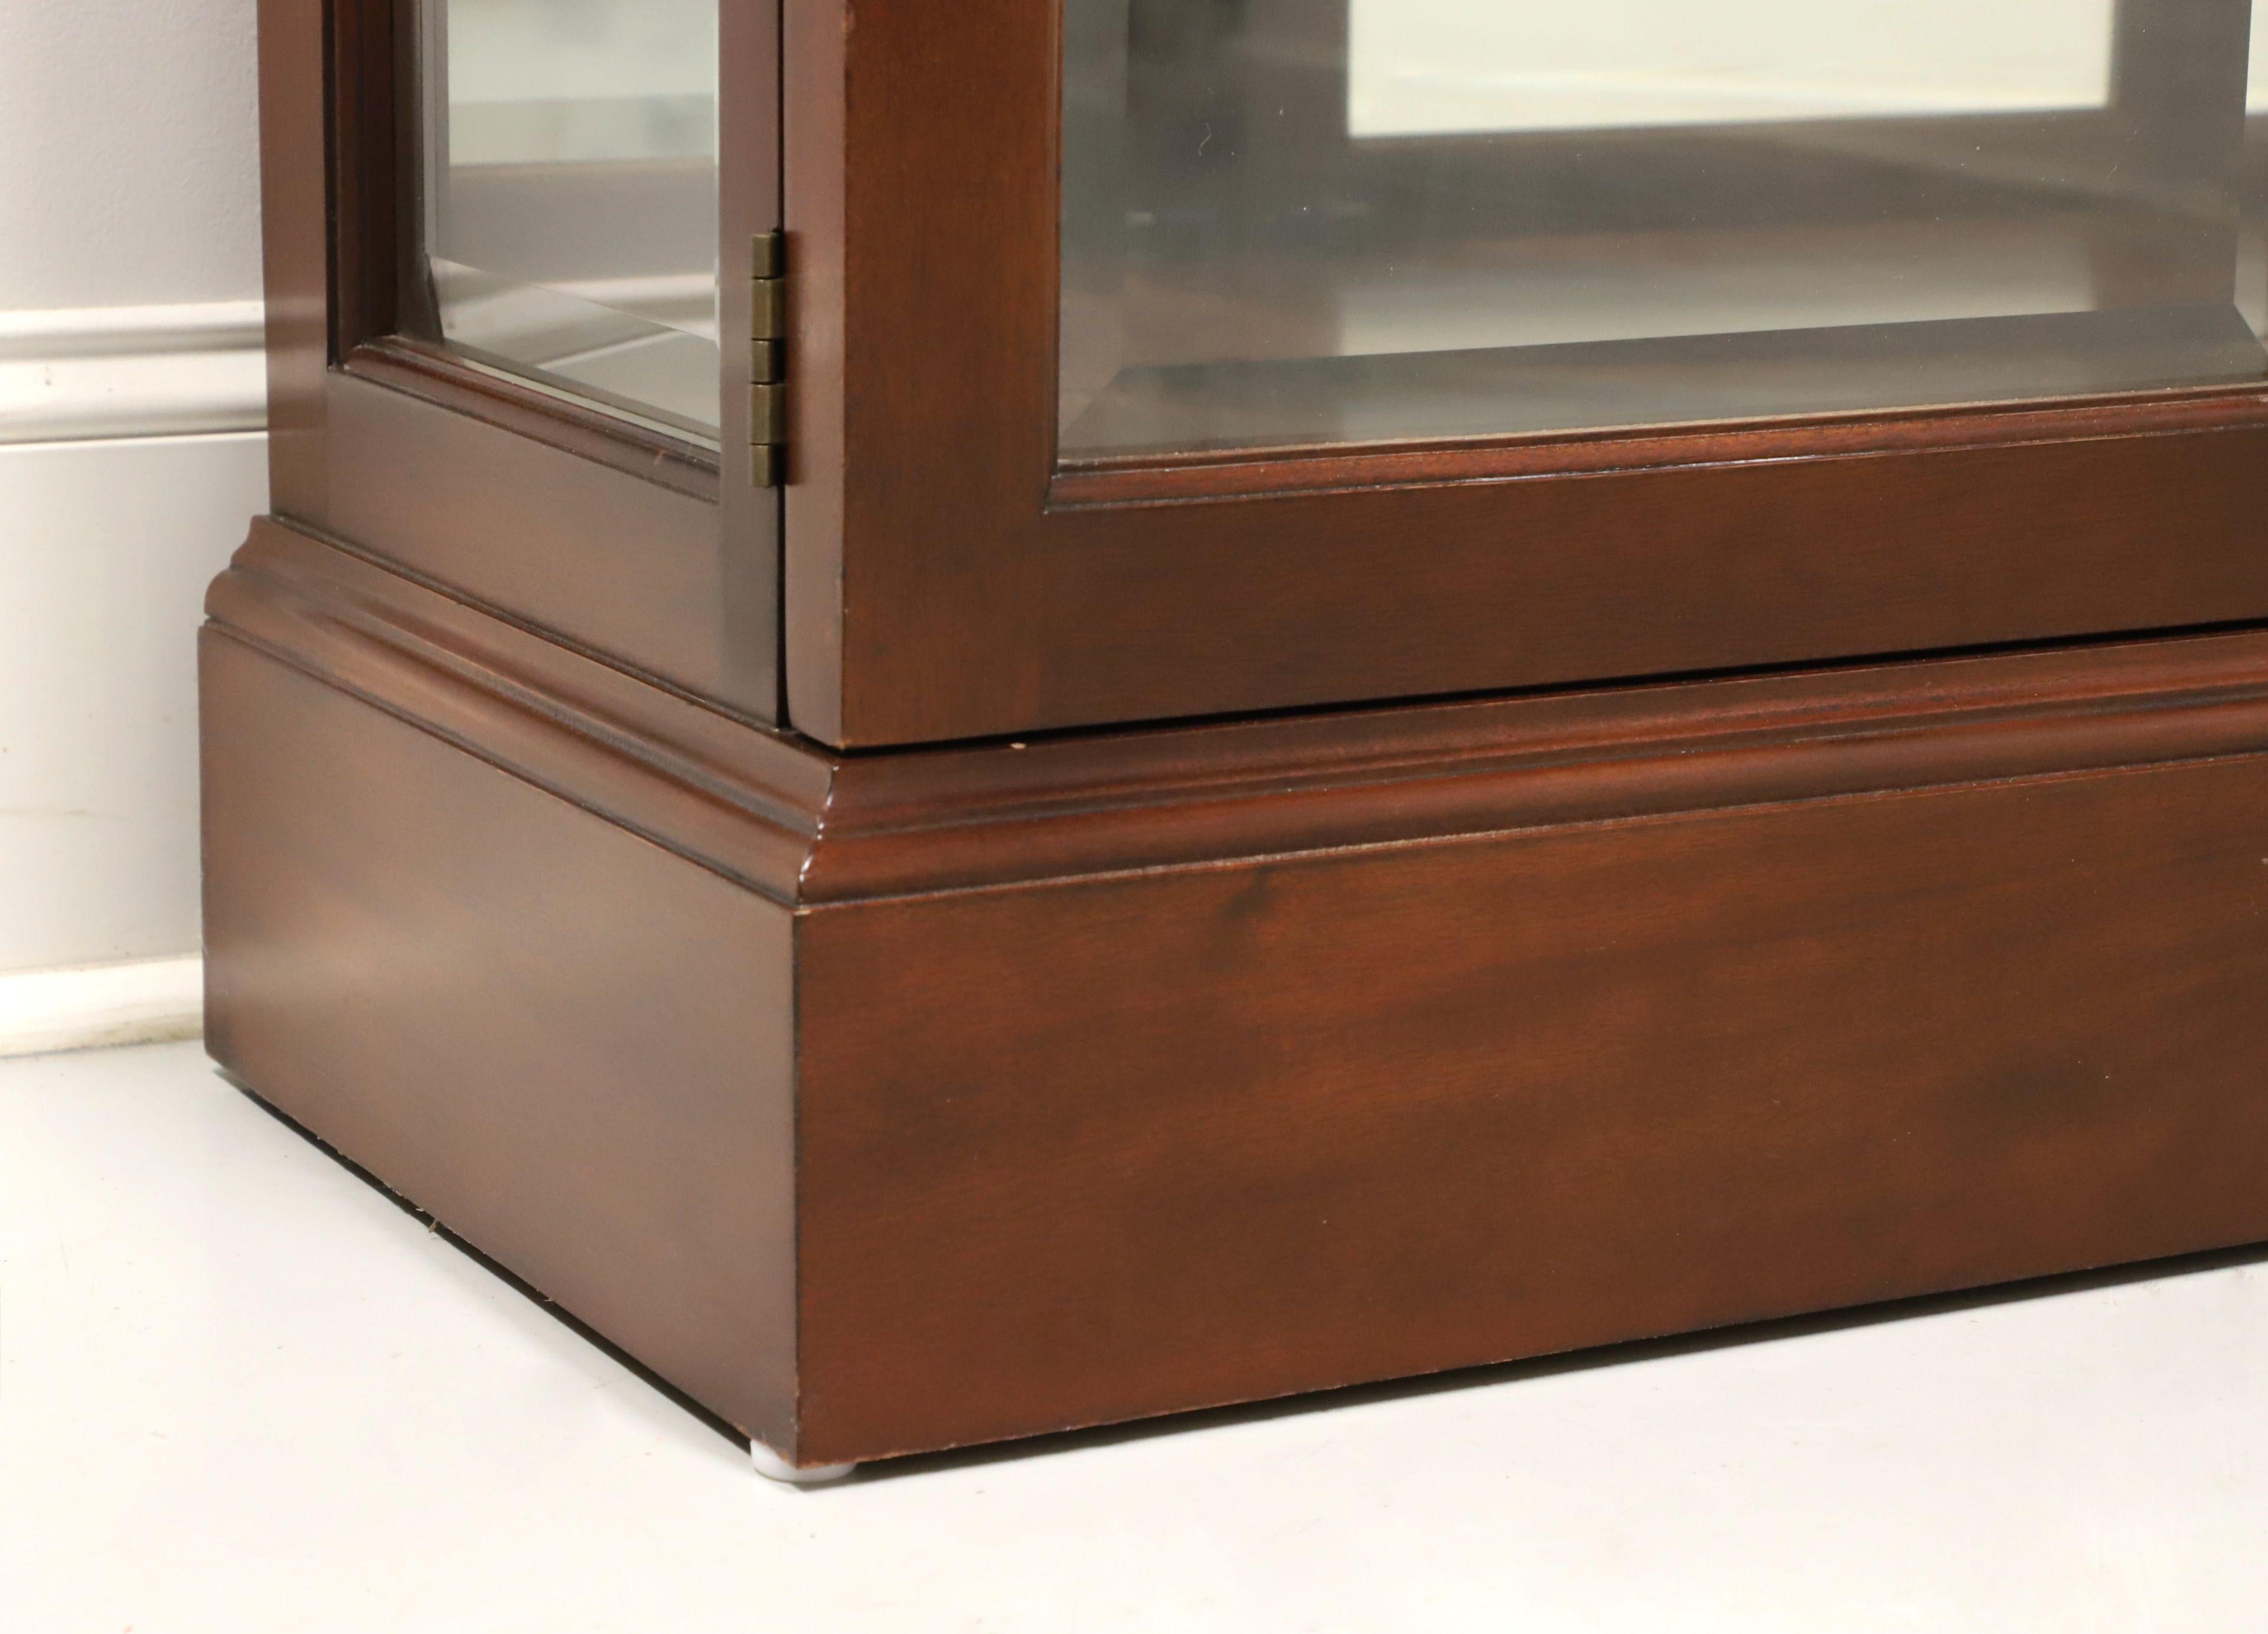 STICKLEY Mahogany Chippendale Curio Display Cabinet - A 1